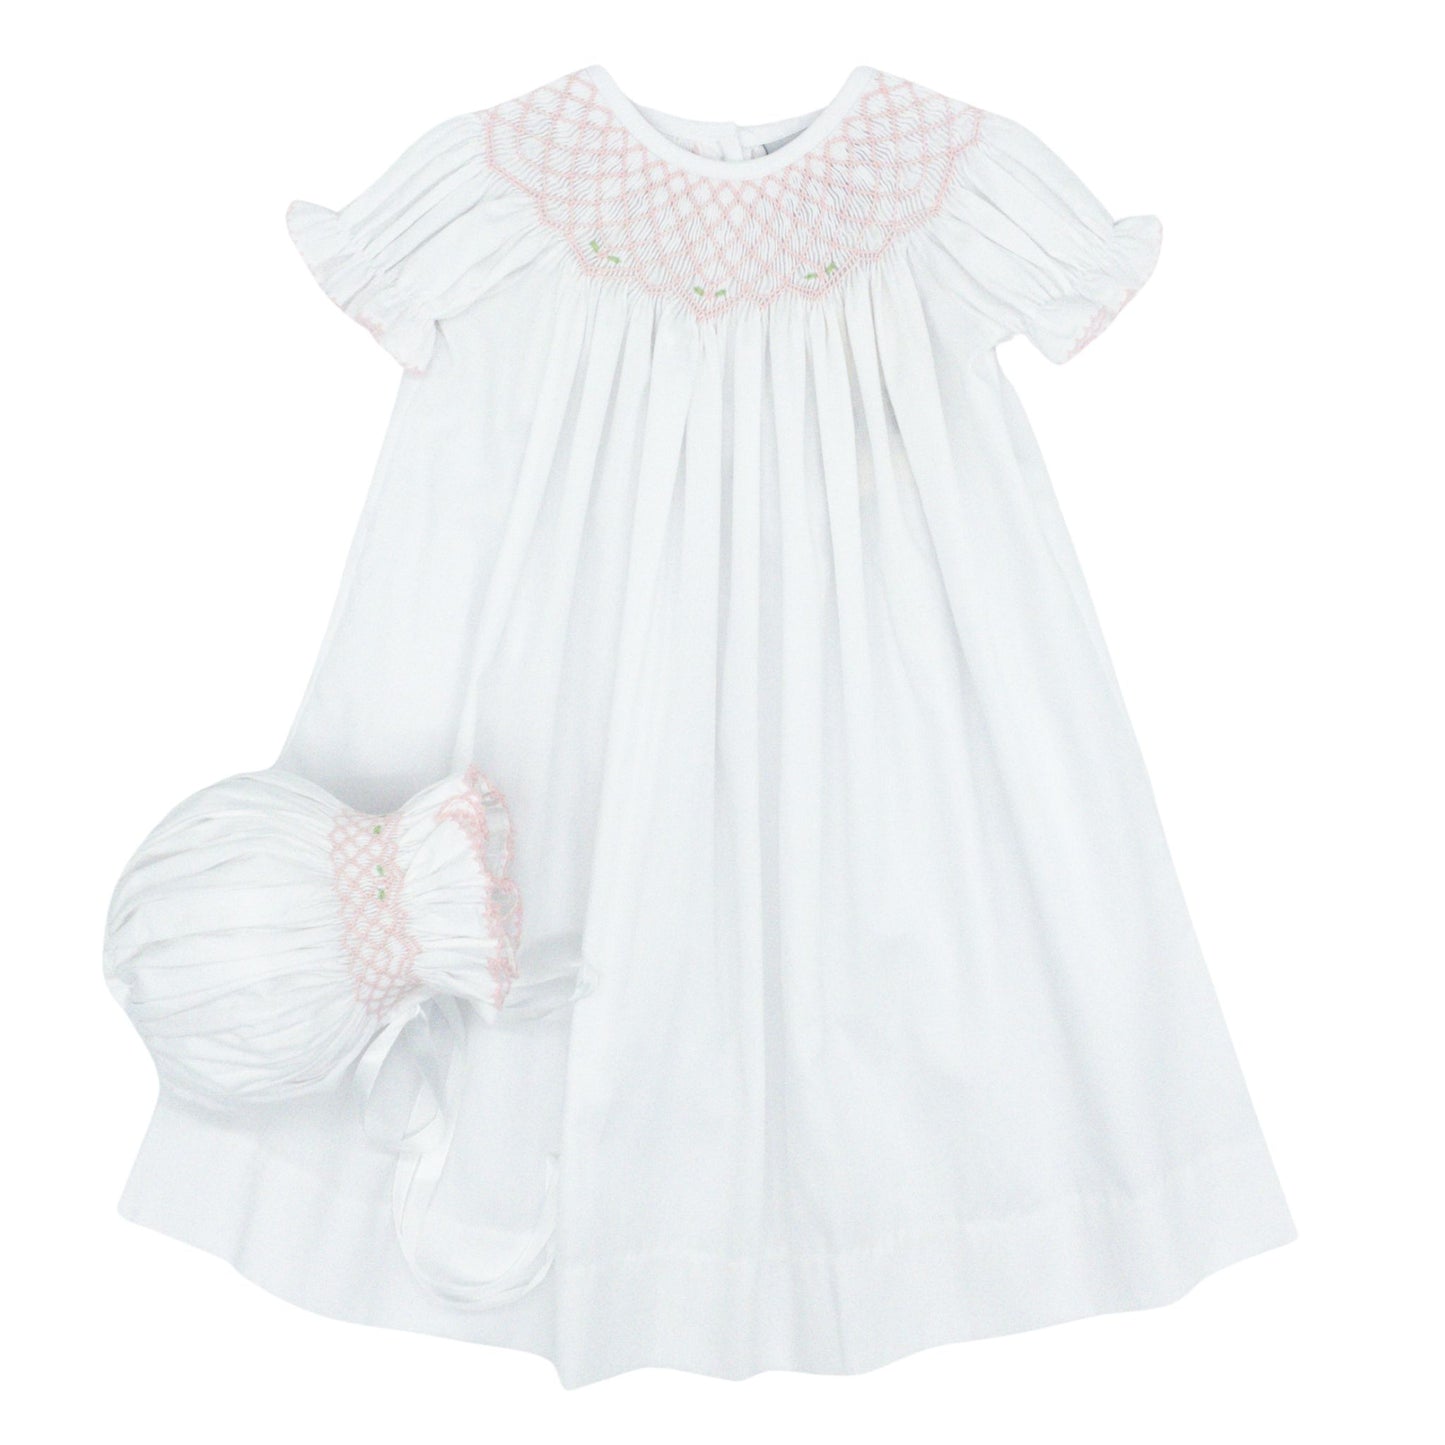 White Smocked Daygown & Bonnet